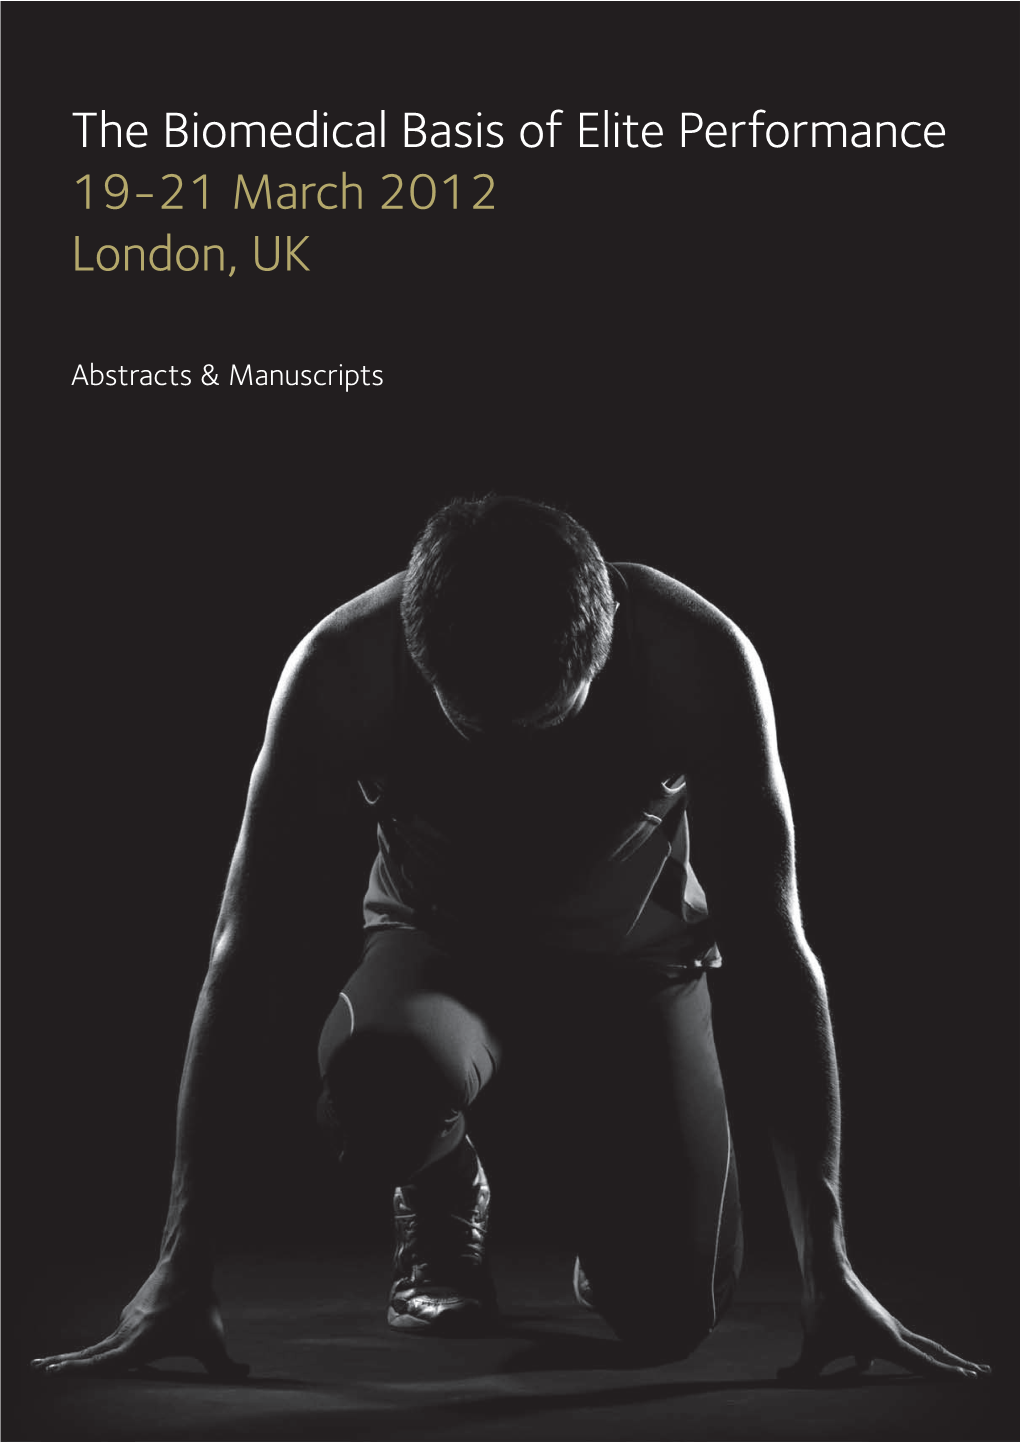 The Biomedical Basis of Elite Performance 19-21 March 2012 London, UK